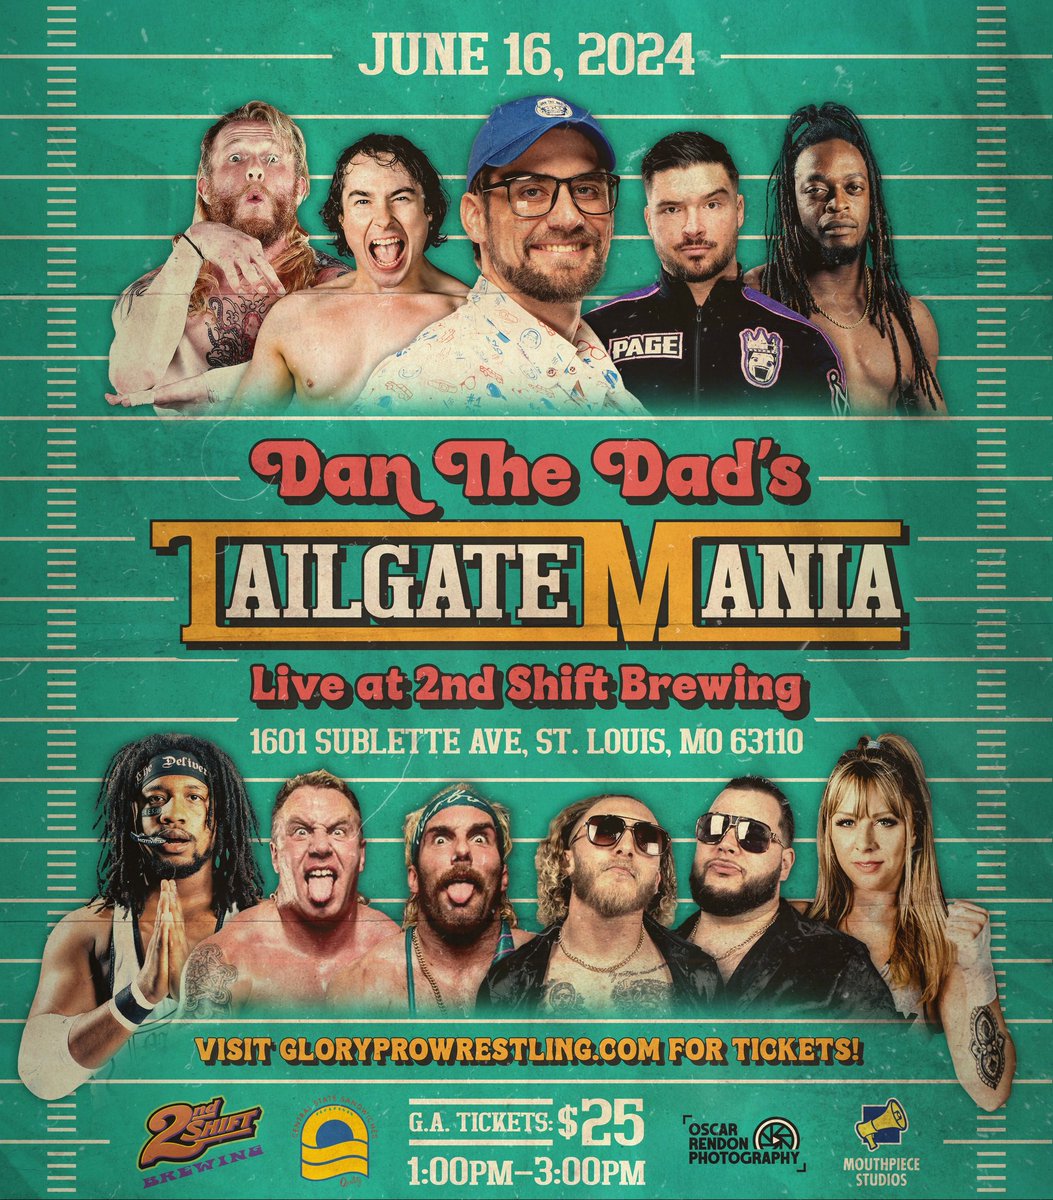 Join us at @2ndshiftbrewing for an afternoon of beers and bodyslams before heading downtown for @TheUFL Championship Game! This is TAILGATEMANIA Sunday June 16 | 1-3pm All tickets $25 GA